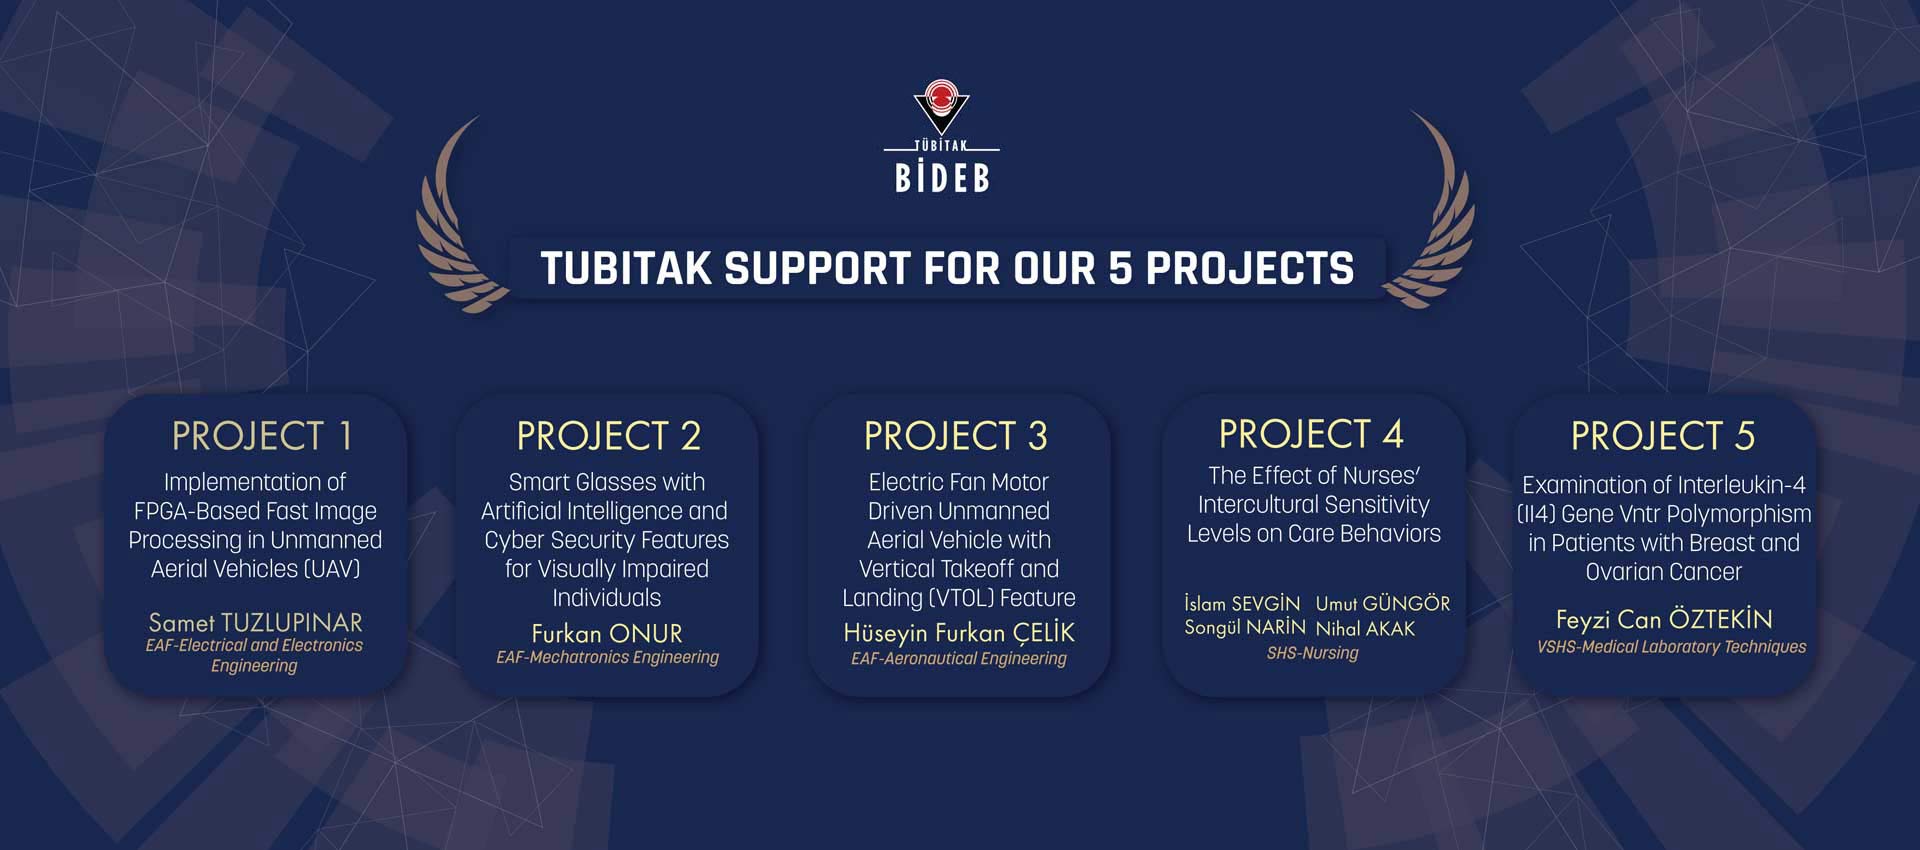 TUBITAK Support for Our 5 Projects